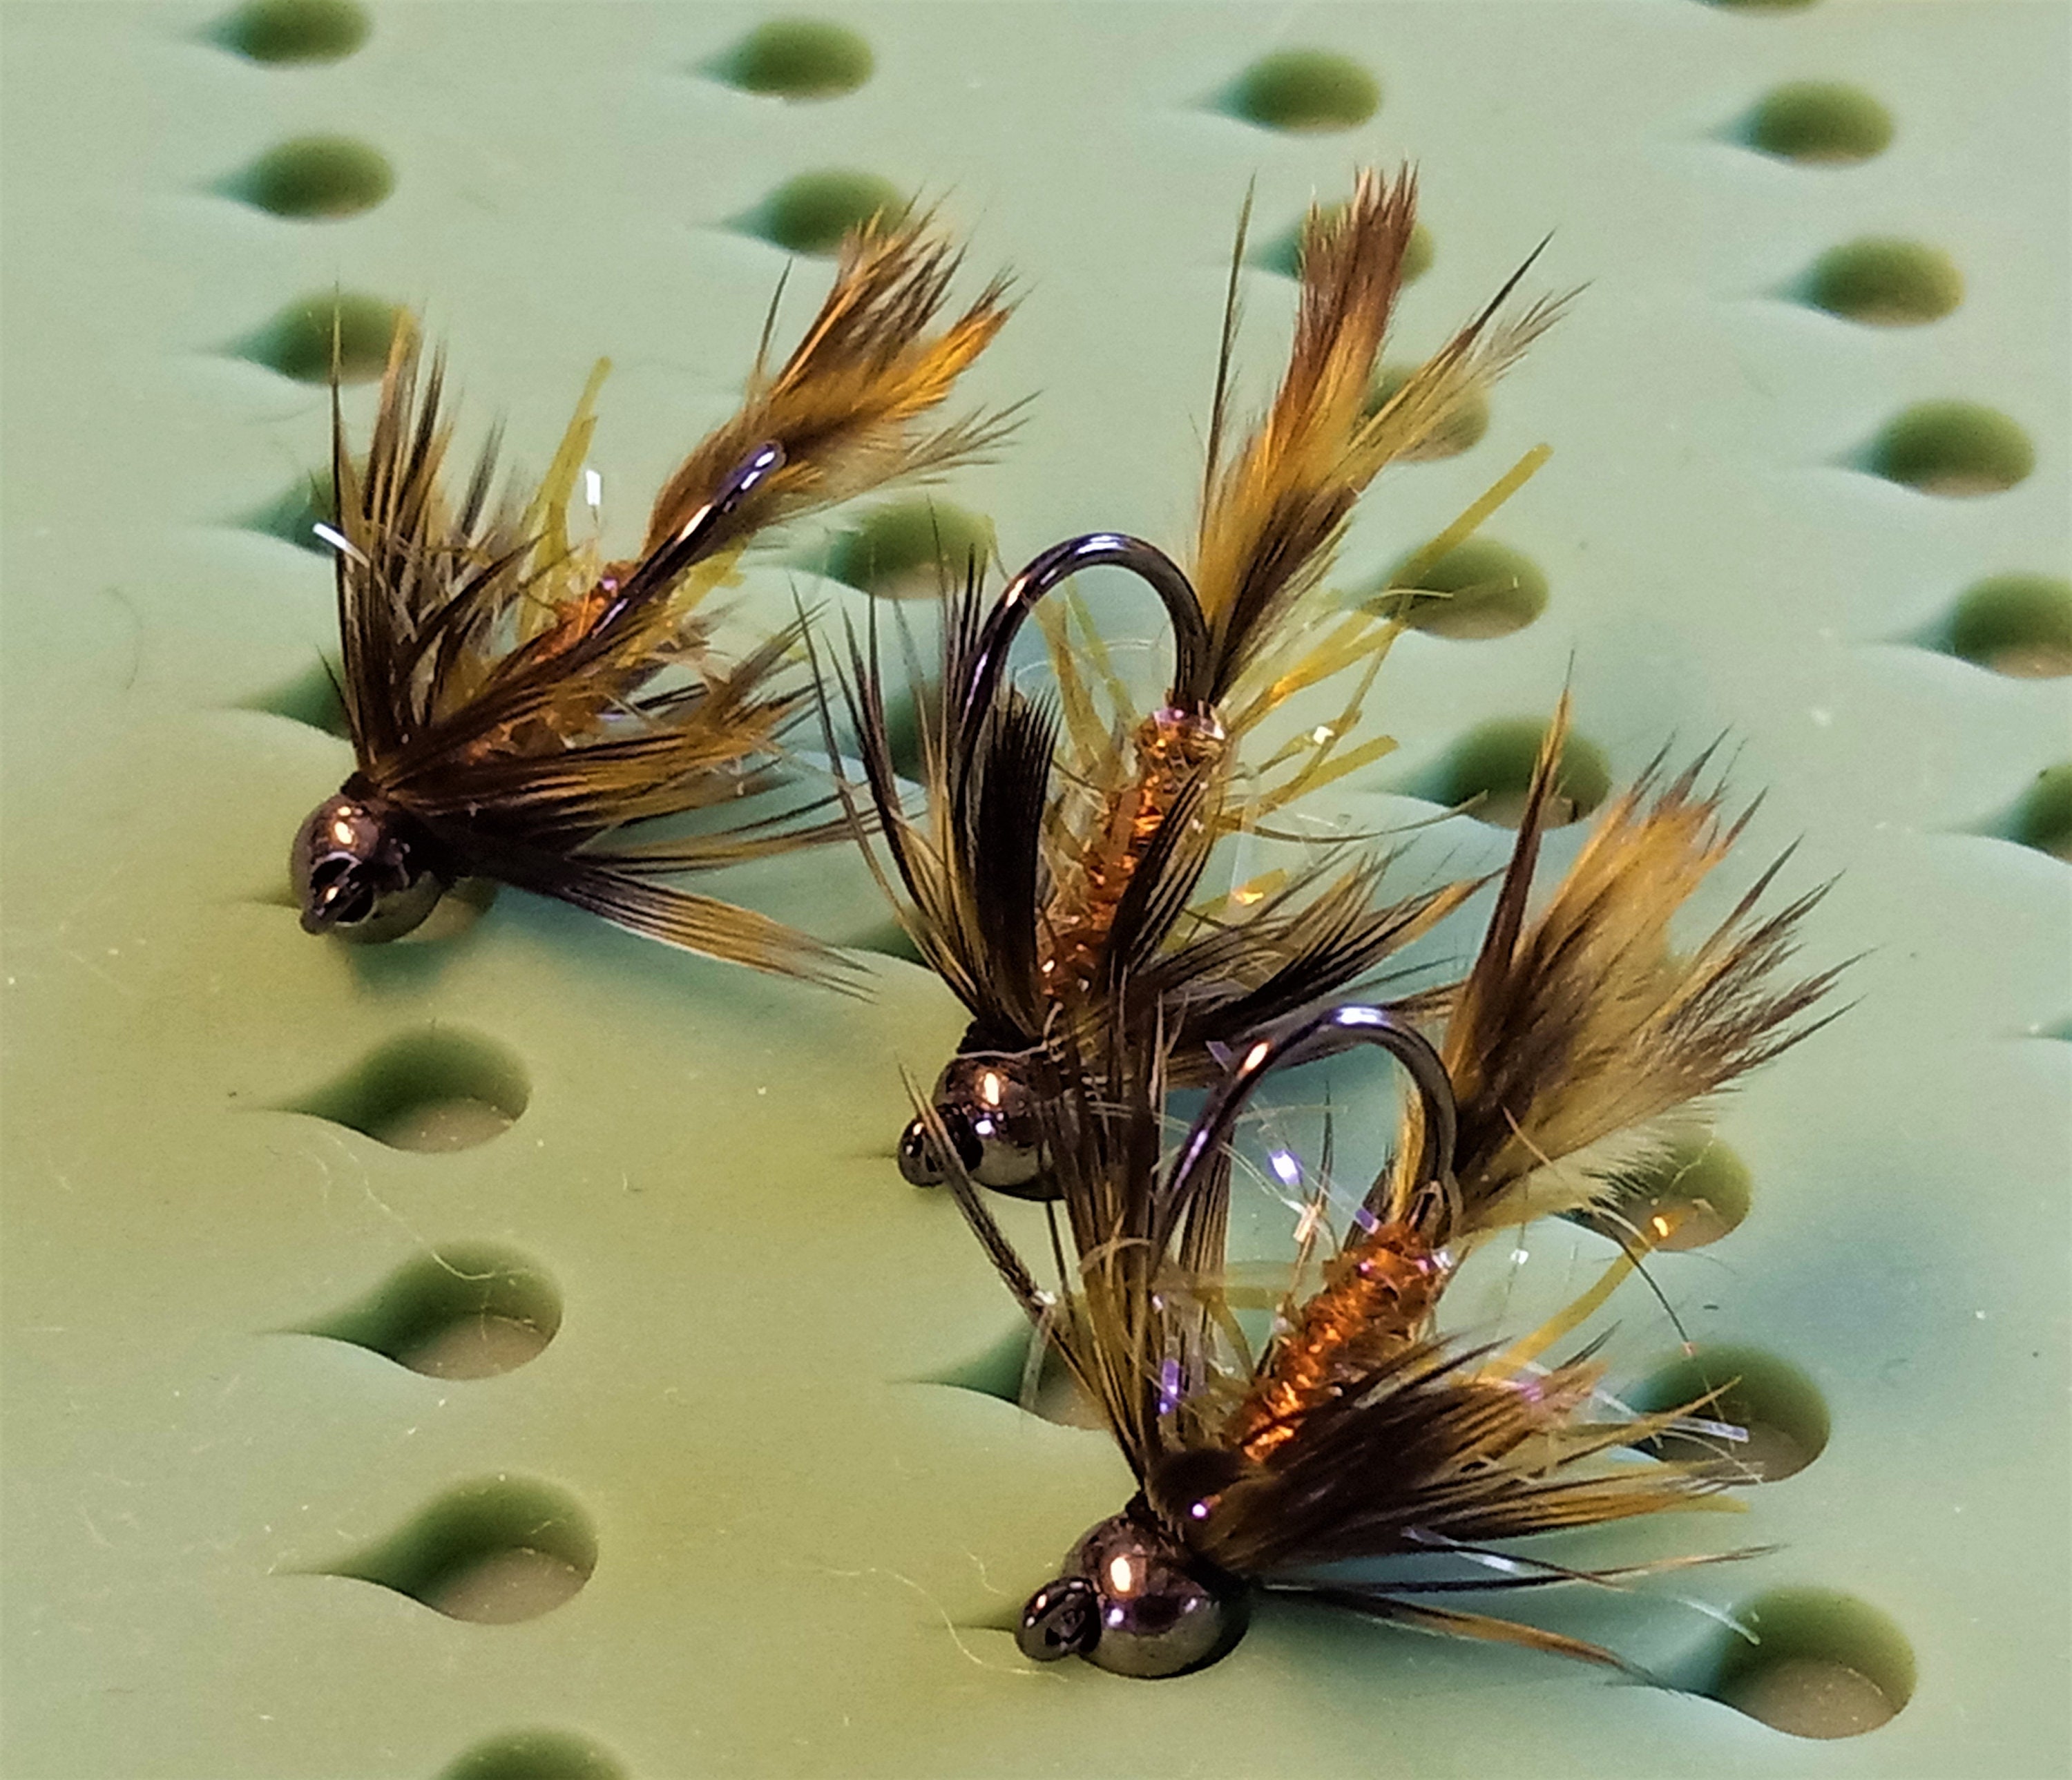 12 Fly Fishing Flies Bead Head Mop Fly 4 Color Combo 4 European Nymphing -   Canada